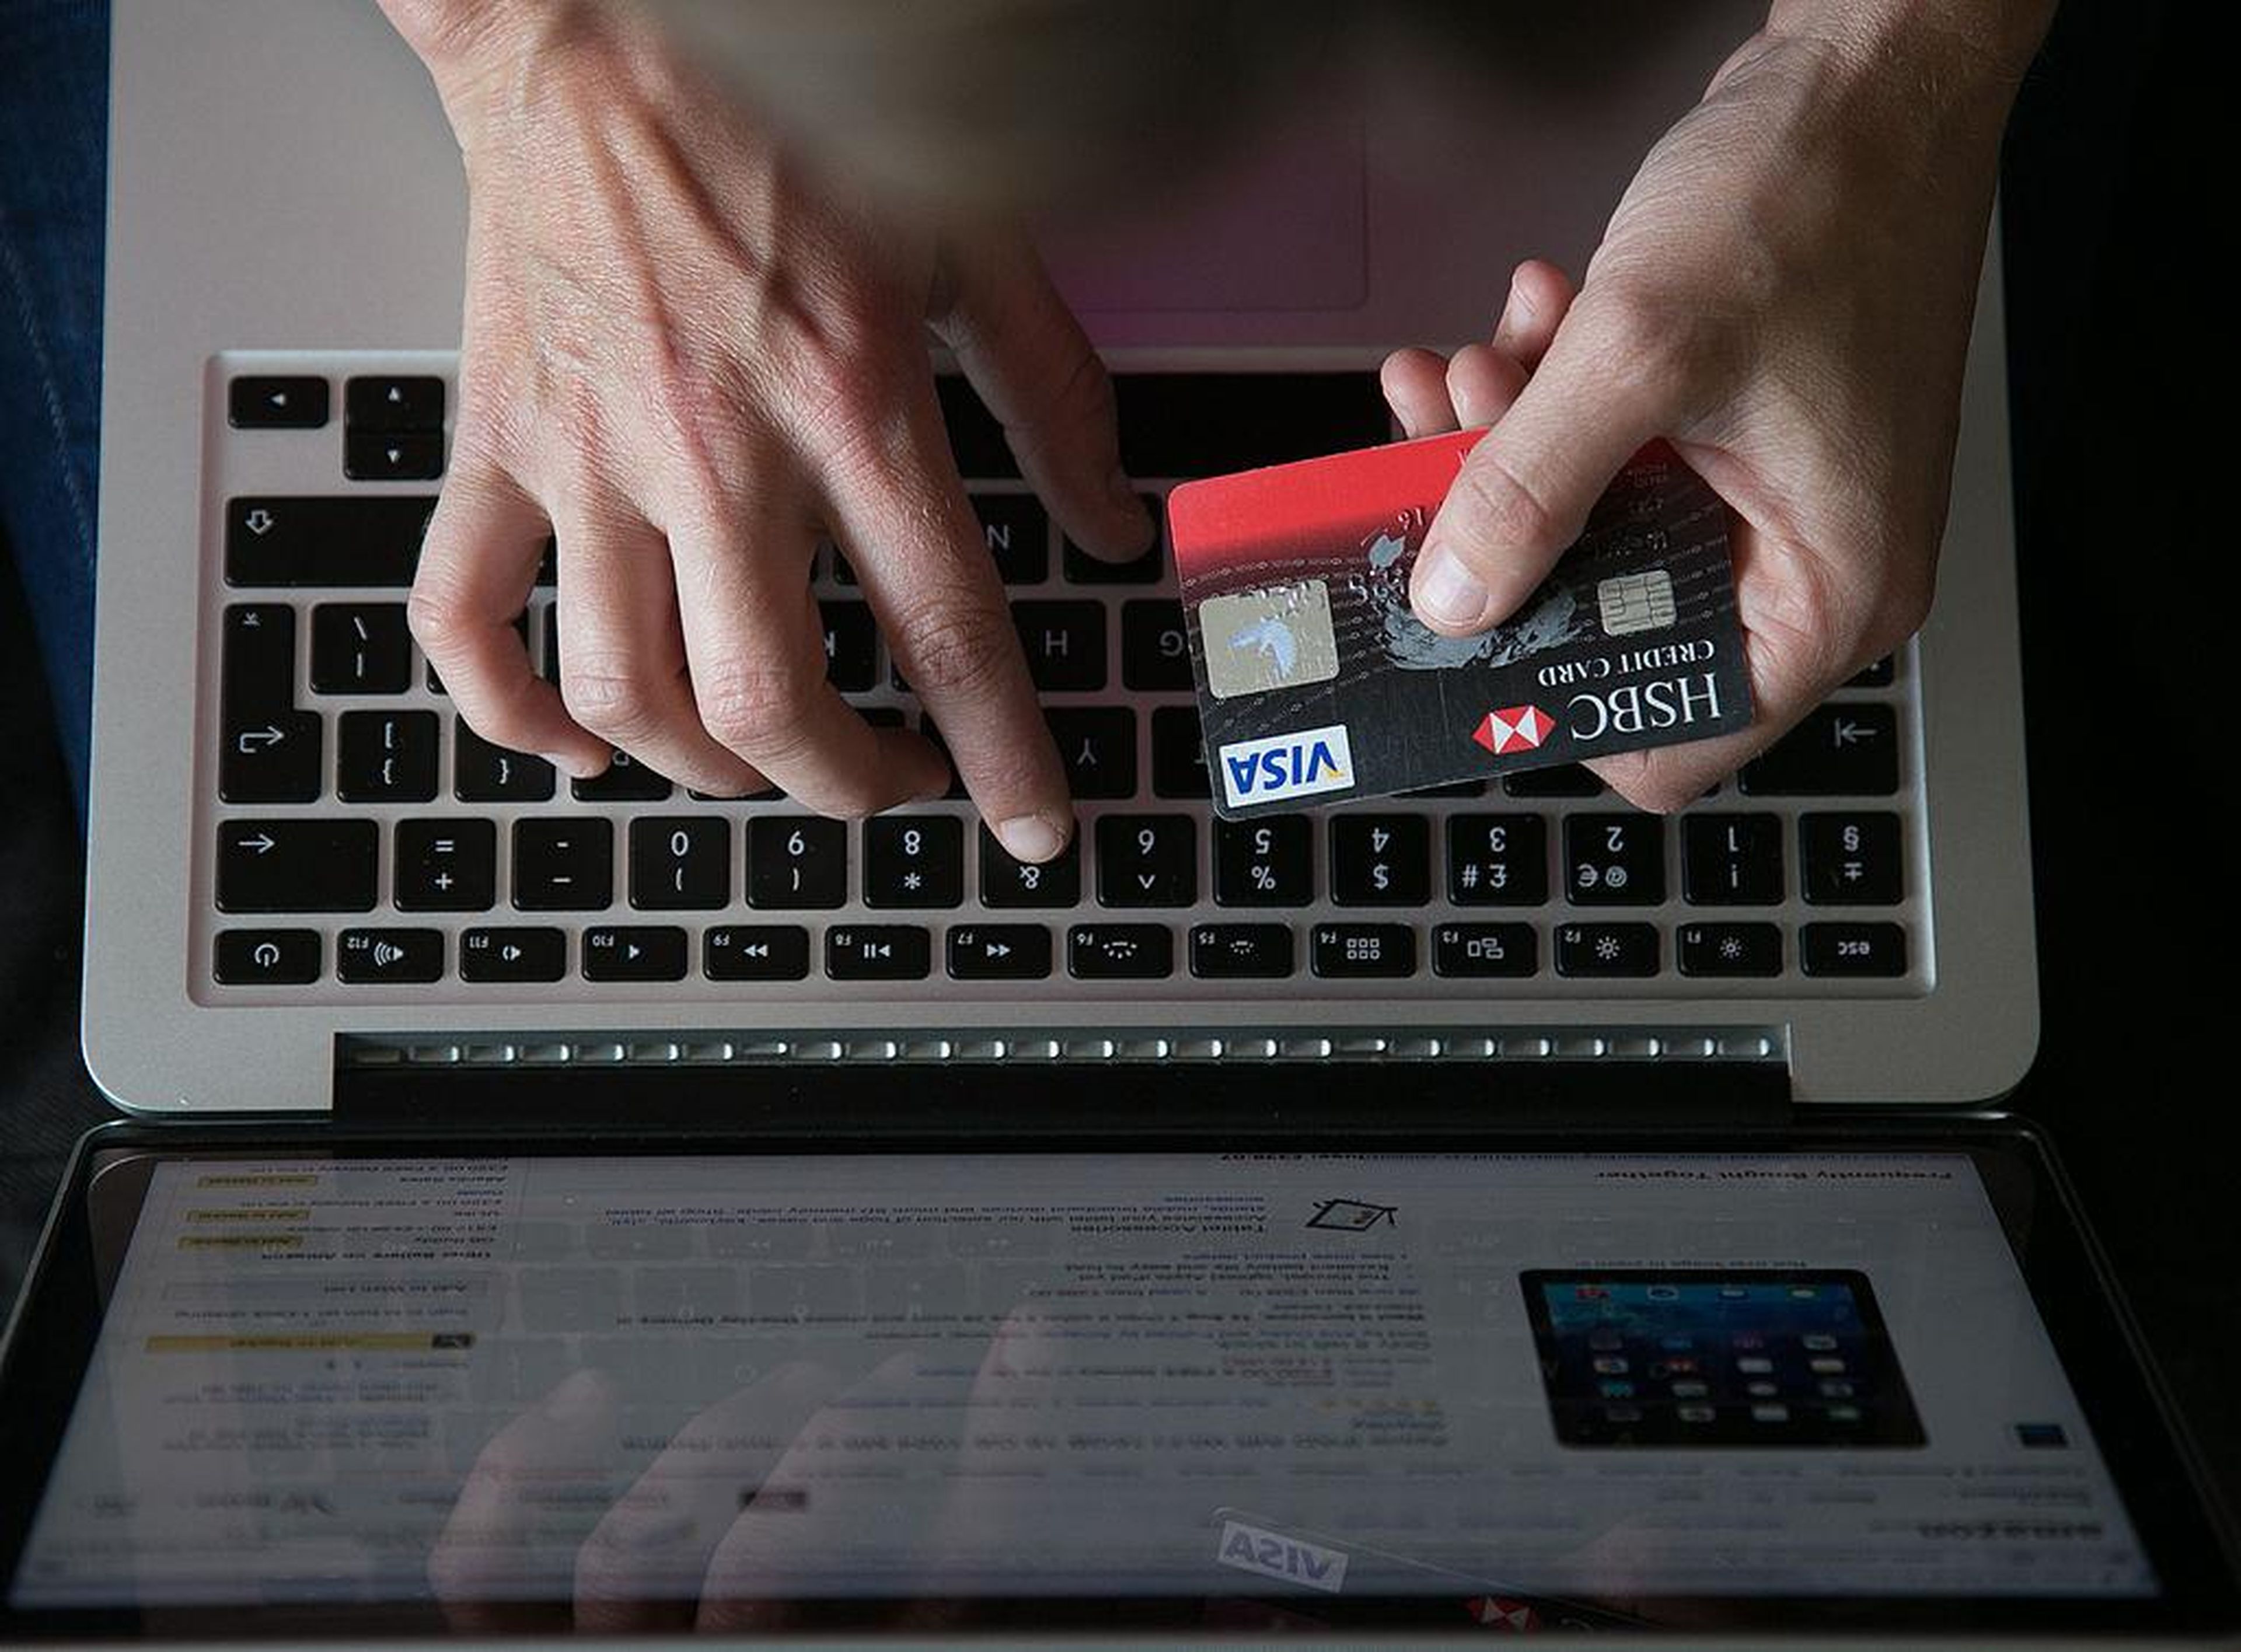 Don't let shopping sites save your credit card information.